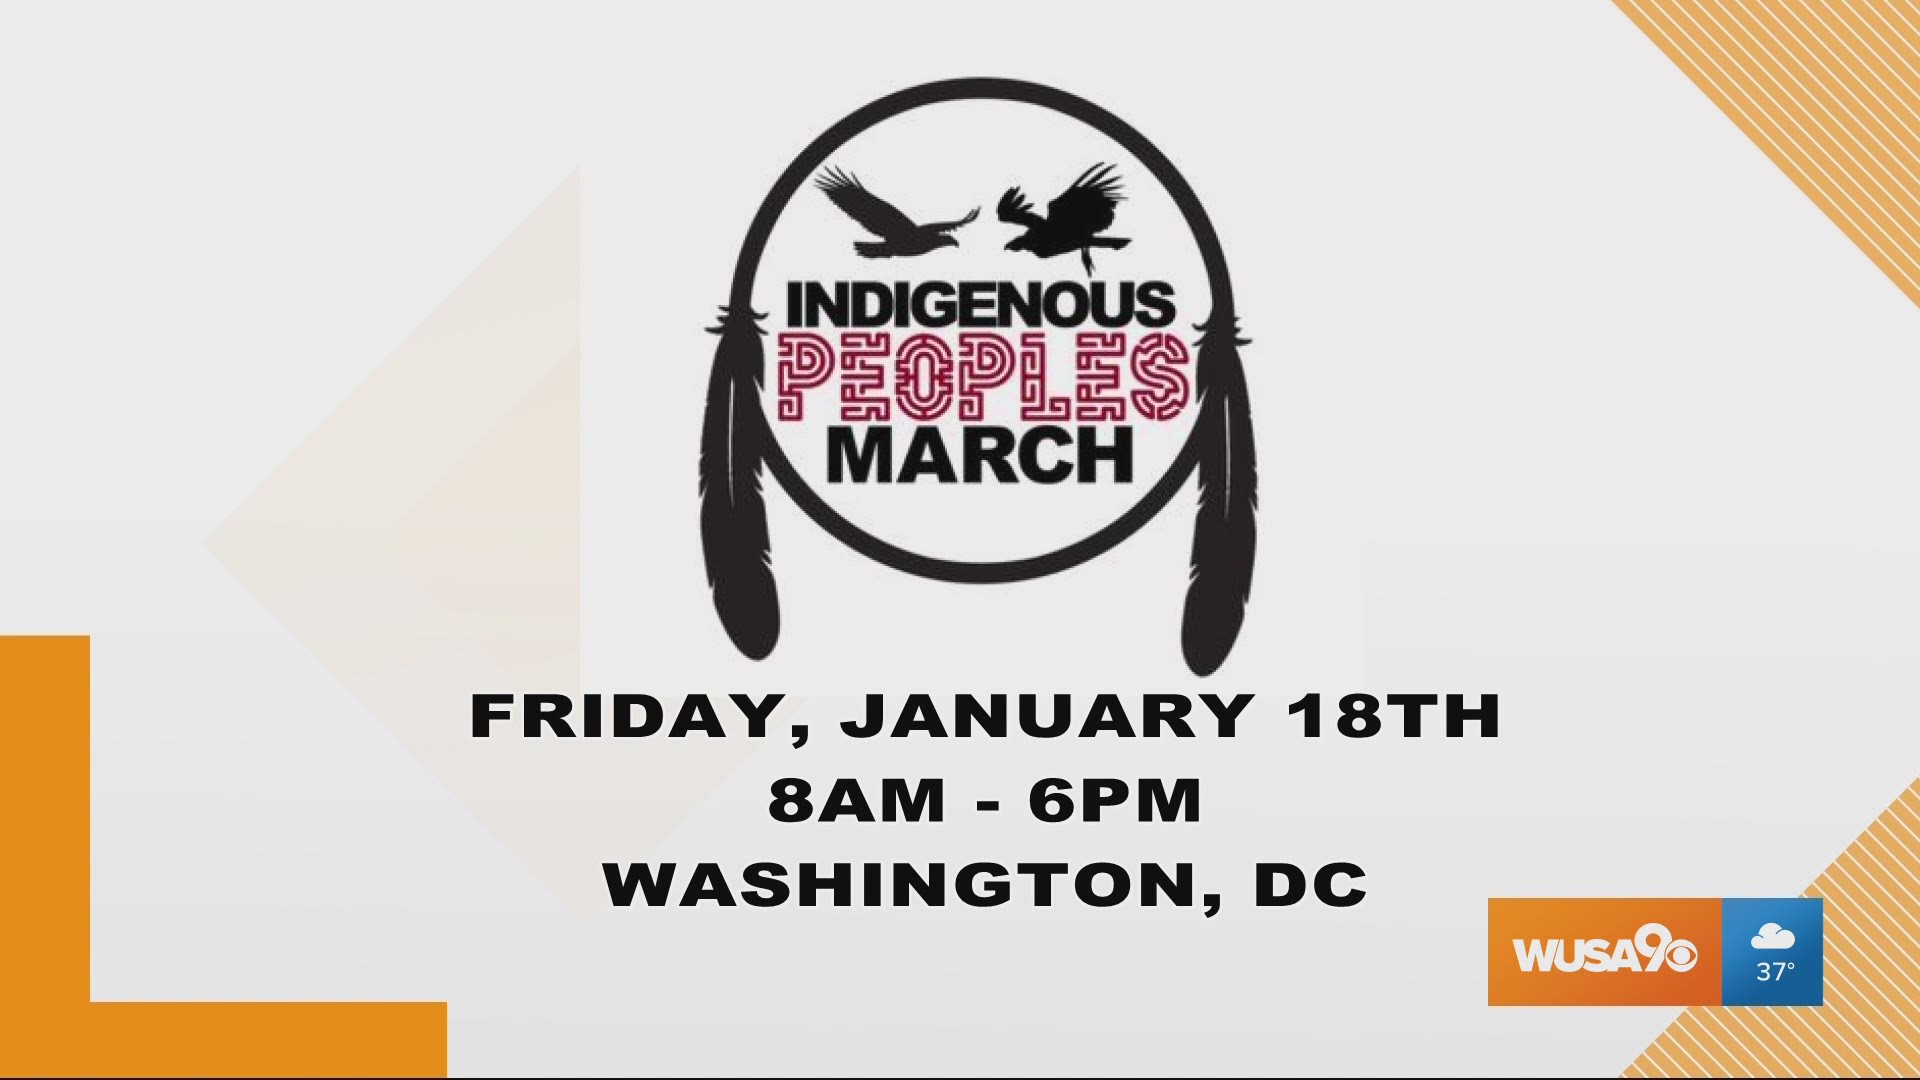 The first march of its scale, Standing Rock Sioux Tribe member and Lead Counsel for Lakota People's Law Project Chase Iron Eyes, Esq., his daughter Takota and Latoya Rule, an Aboriginal Activist, explain how international tribes as well as Native American